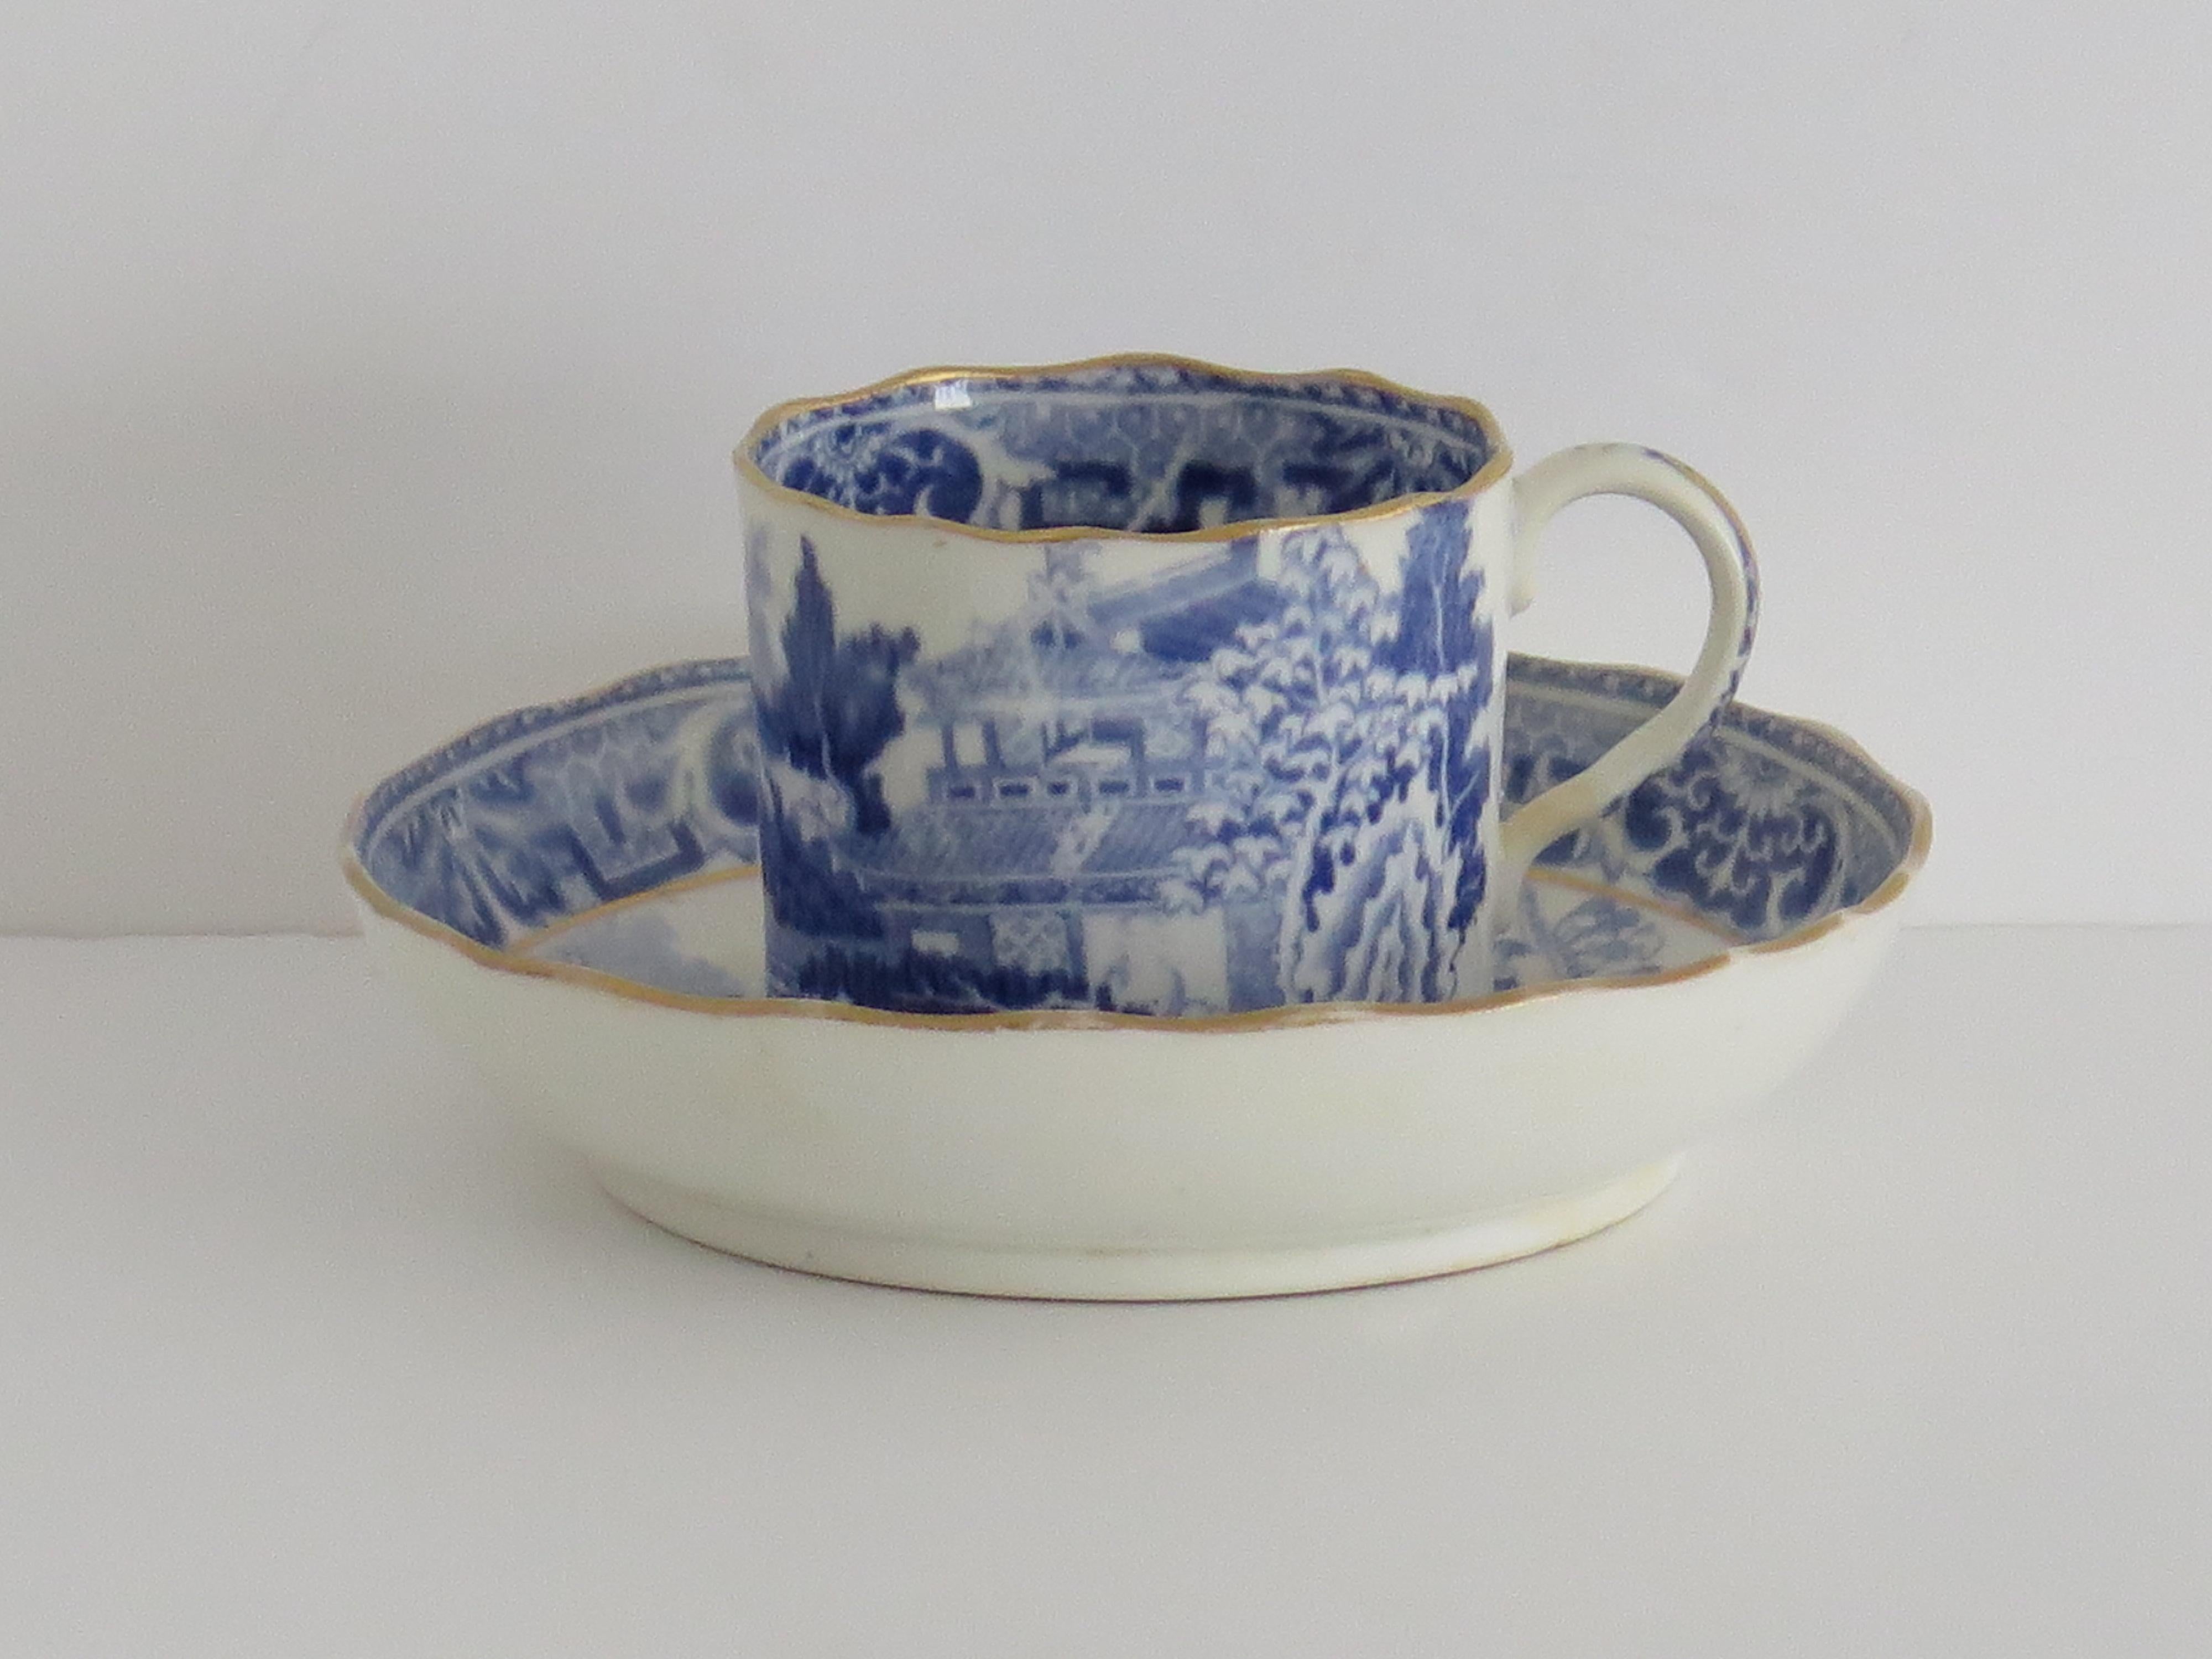 This is a Miles Mason Duo of two pieces of blue and white hand gilded porcelain comprising a coffee can and a saucer, all in the Chinaman on Verandah pattern, made by Miles Mason (Mason's), Staffordshire Potteries, England around the turn of the